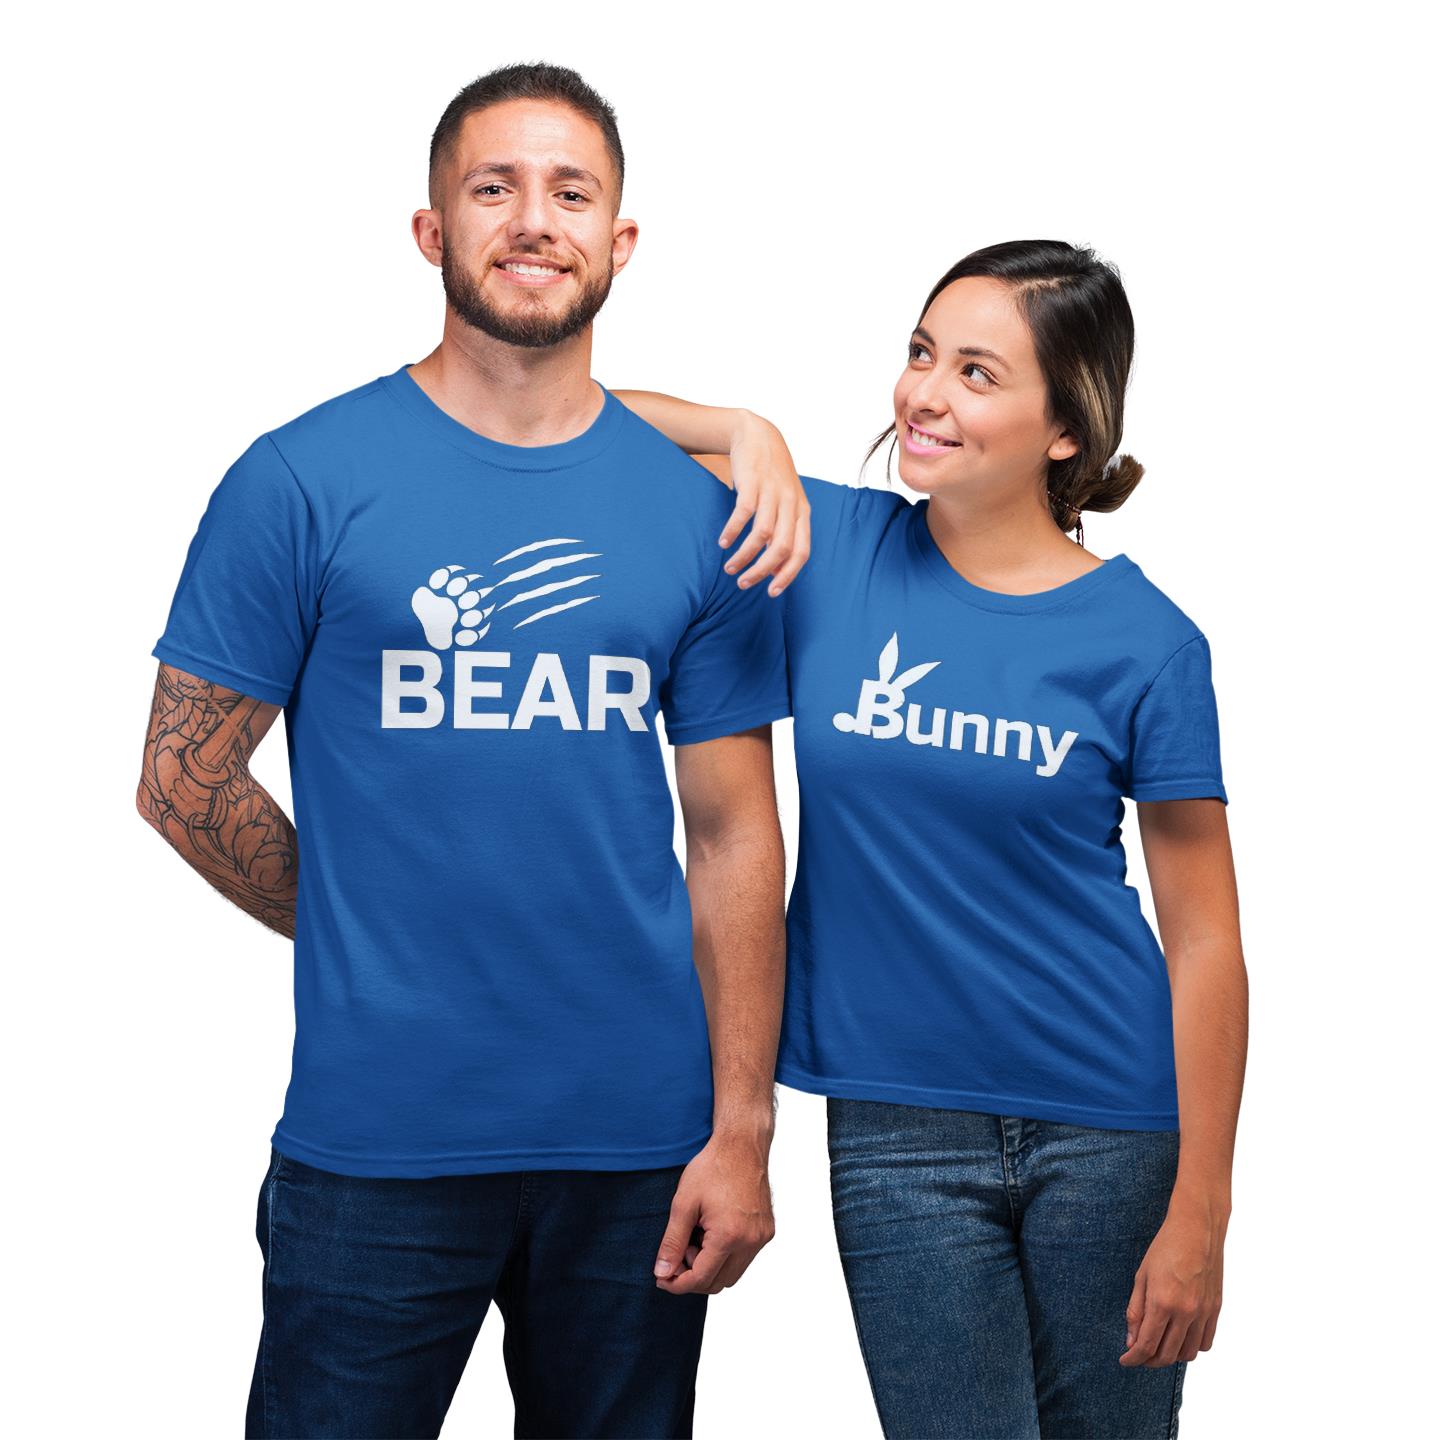 Bear Bunny Unisex For Couple Love Matching T-Shirt